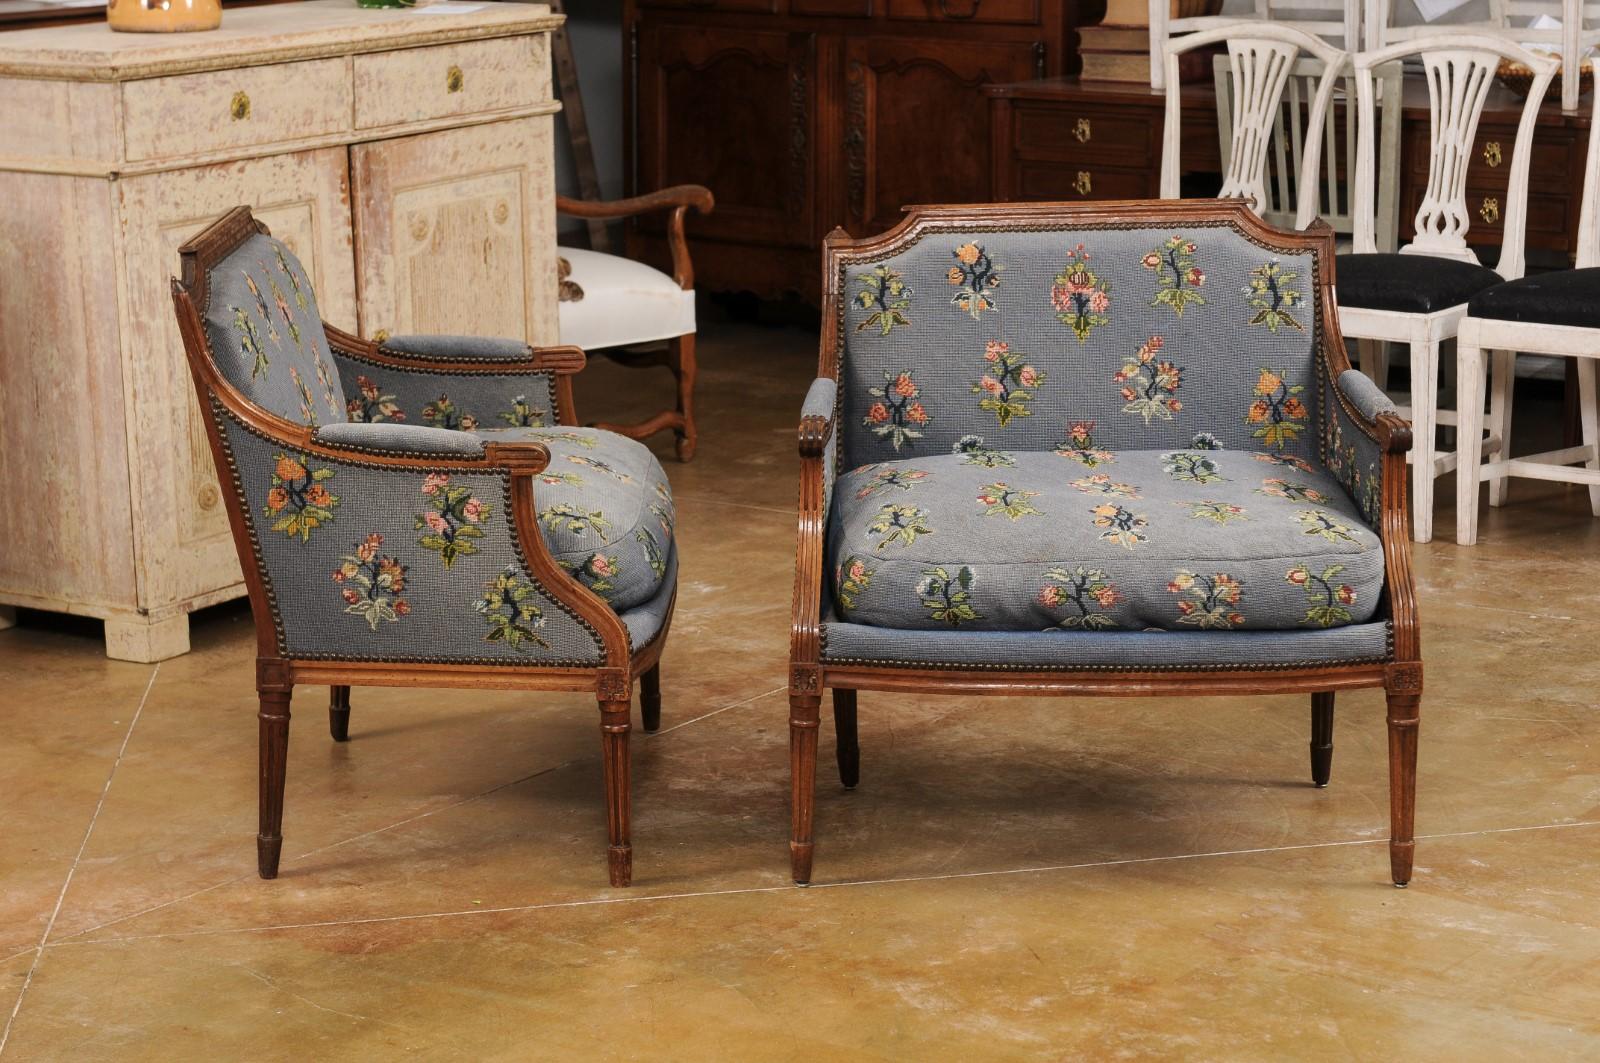 Pair of French Louis XVI Period 1790s Bergère Marquise Chairs with Upholstery For Sale 1